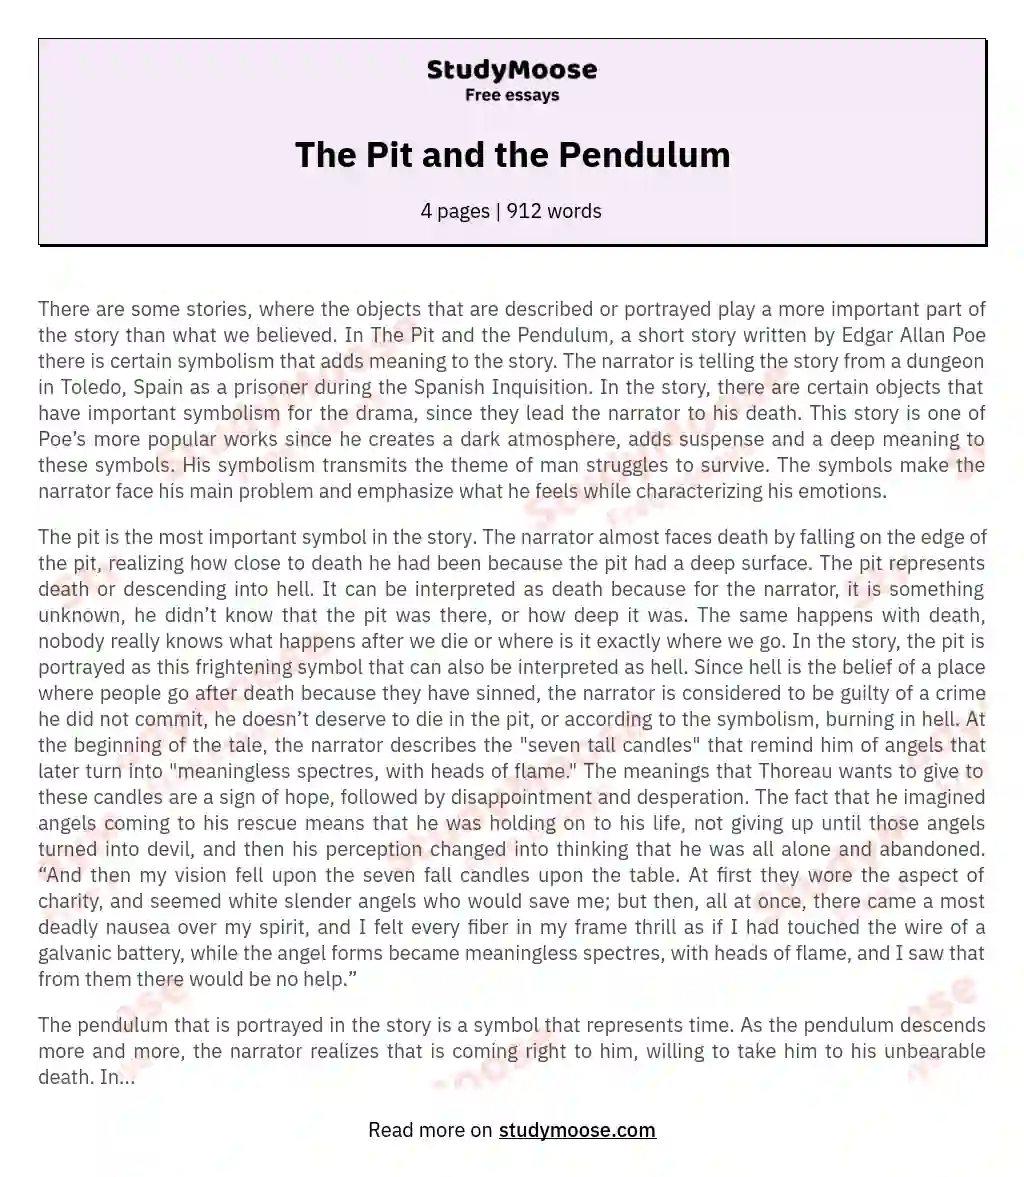 when was the pit and the pendulum written